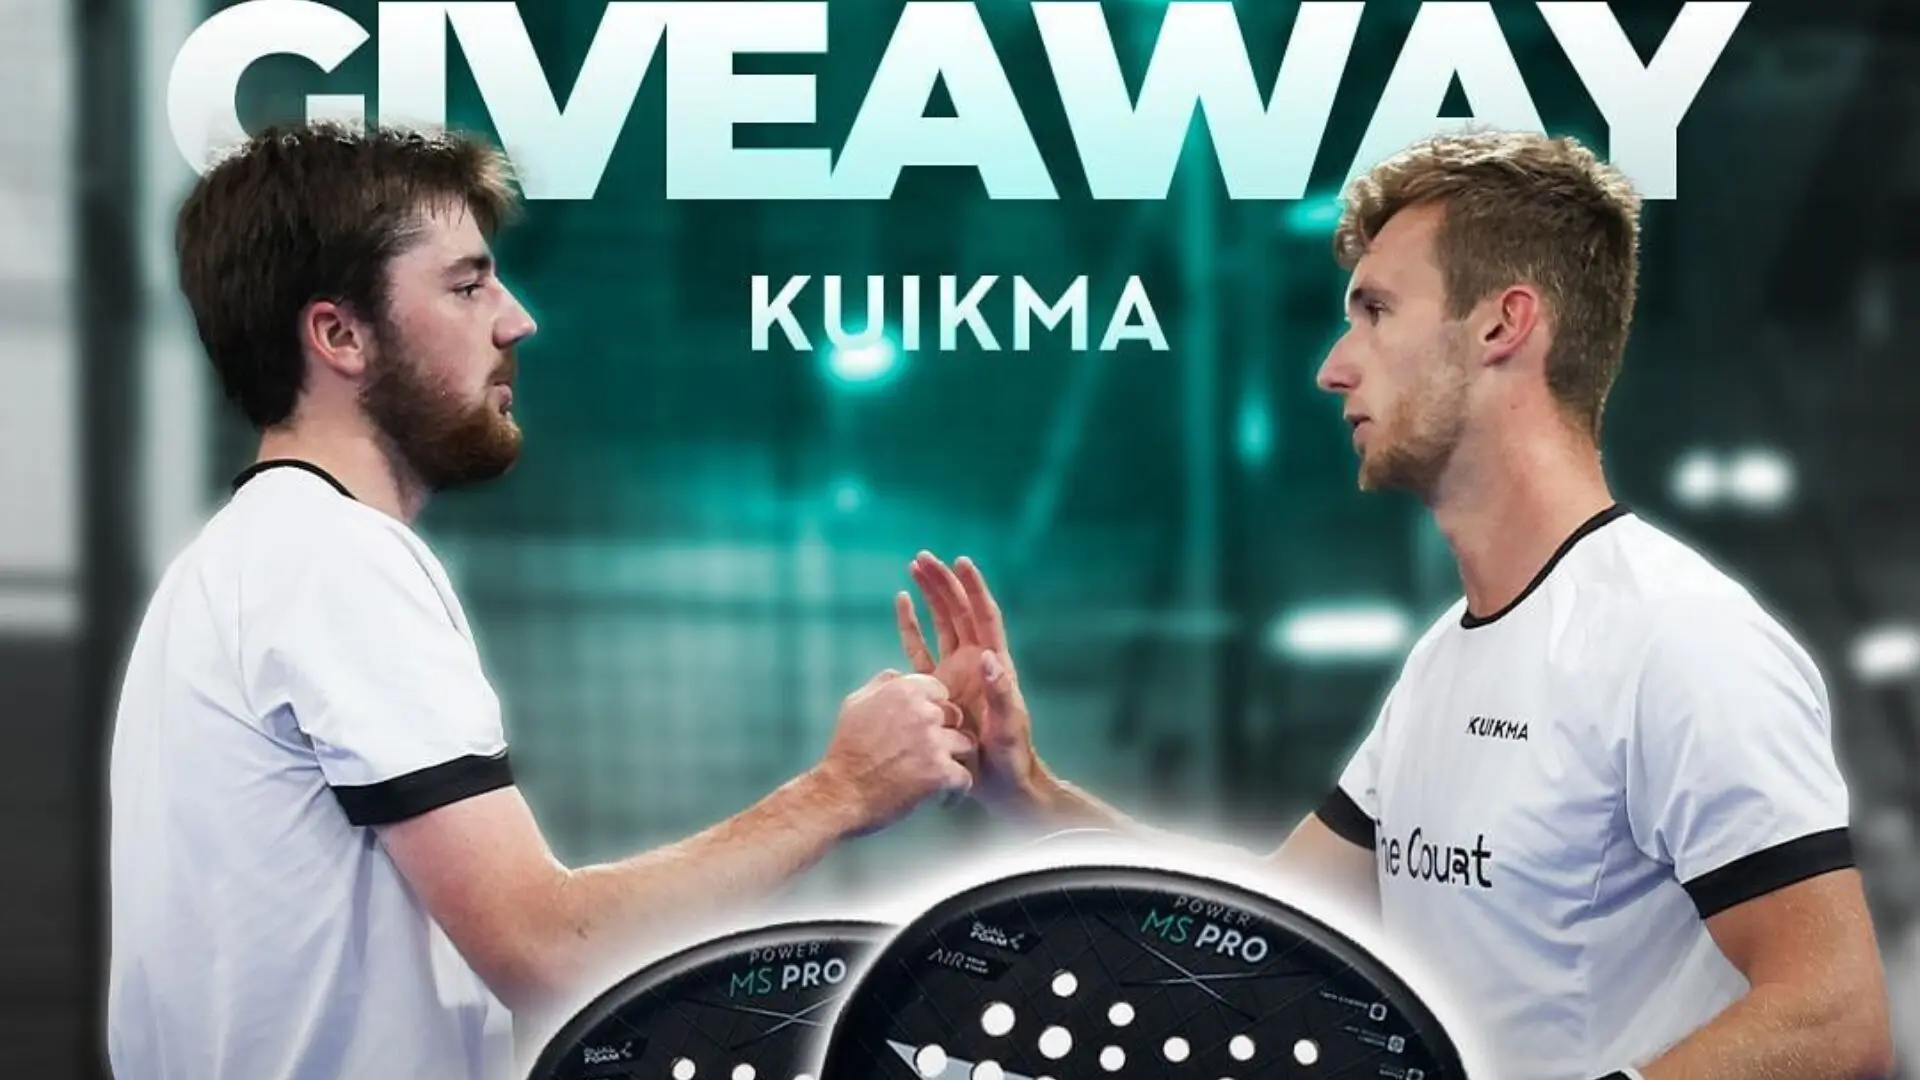 Kuikma: two MS Pro to be won with Dylan Guichard and Julien Seurin